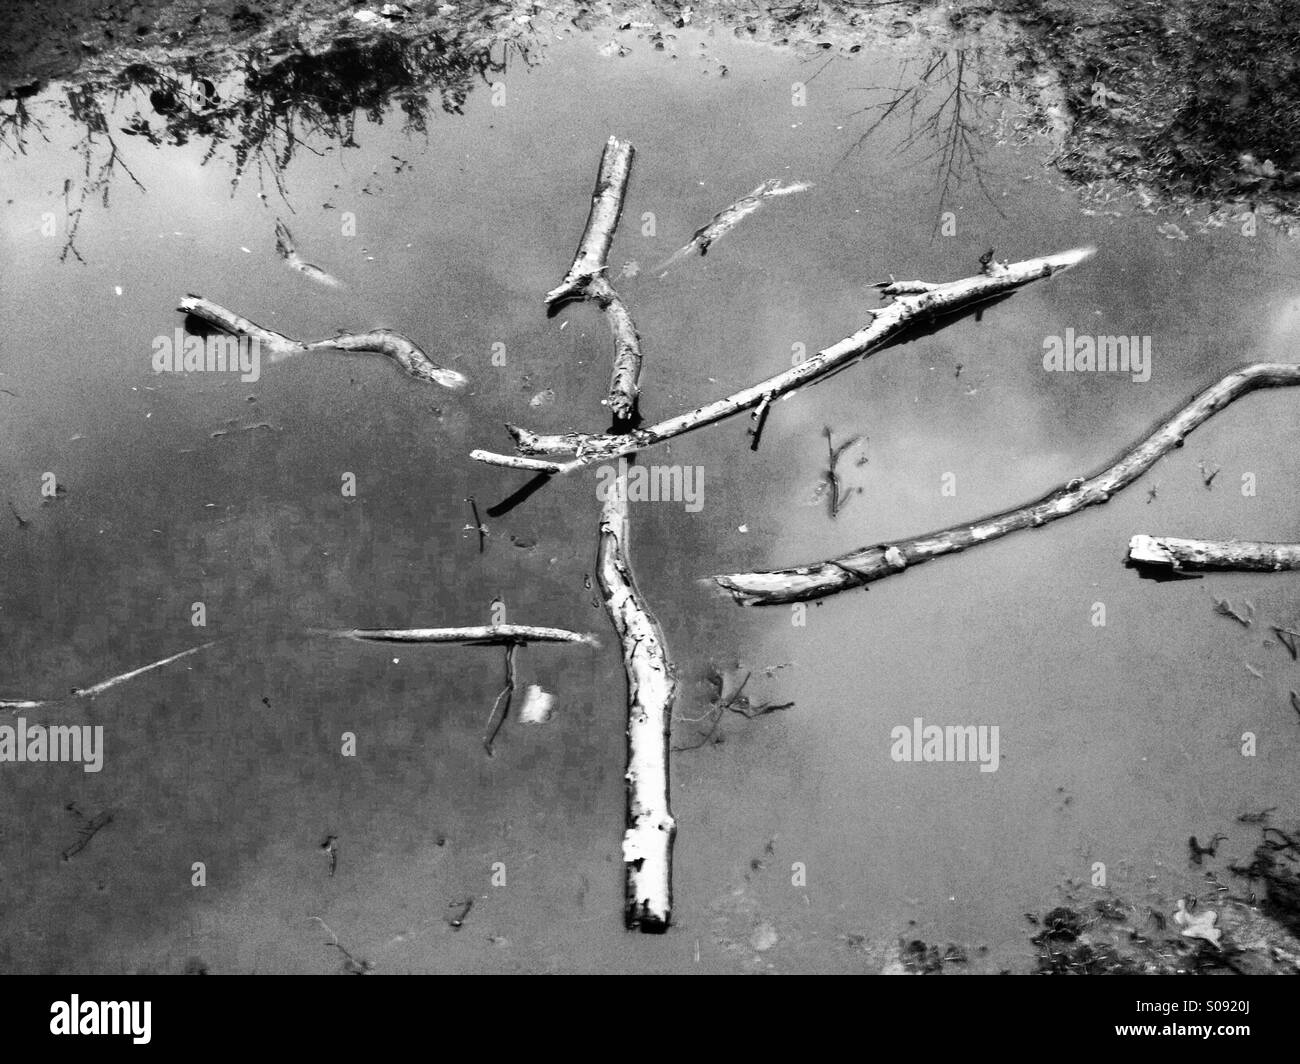 Fallen Branches of a tree in a puddle, Sutton Heath, Suffolk, UK. Stock Photo